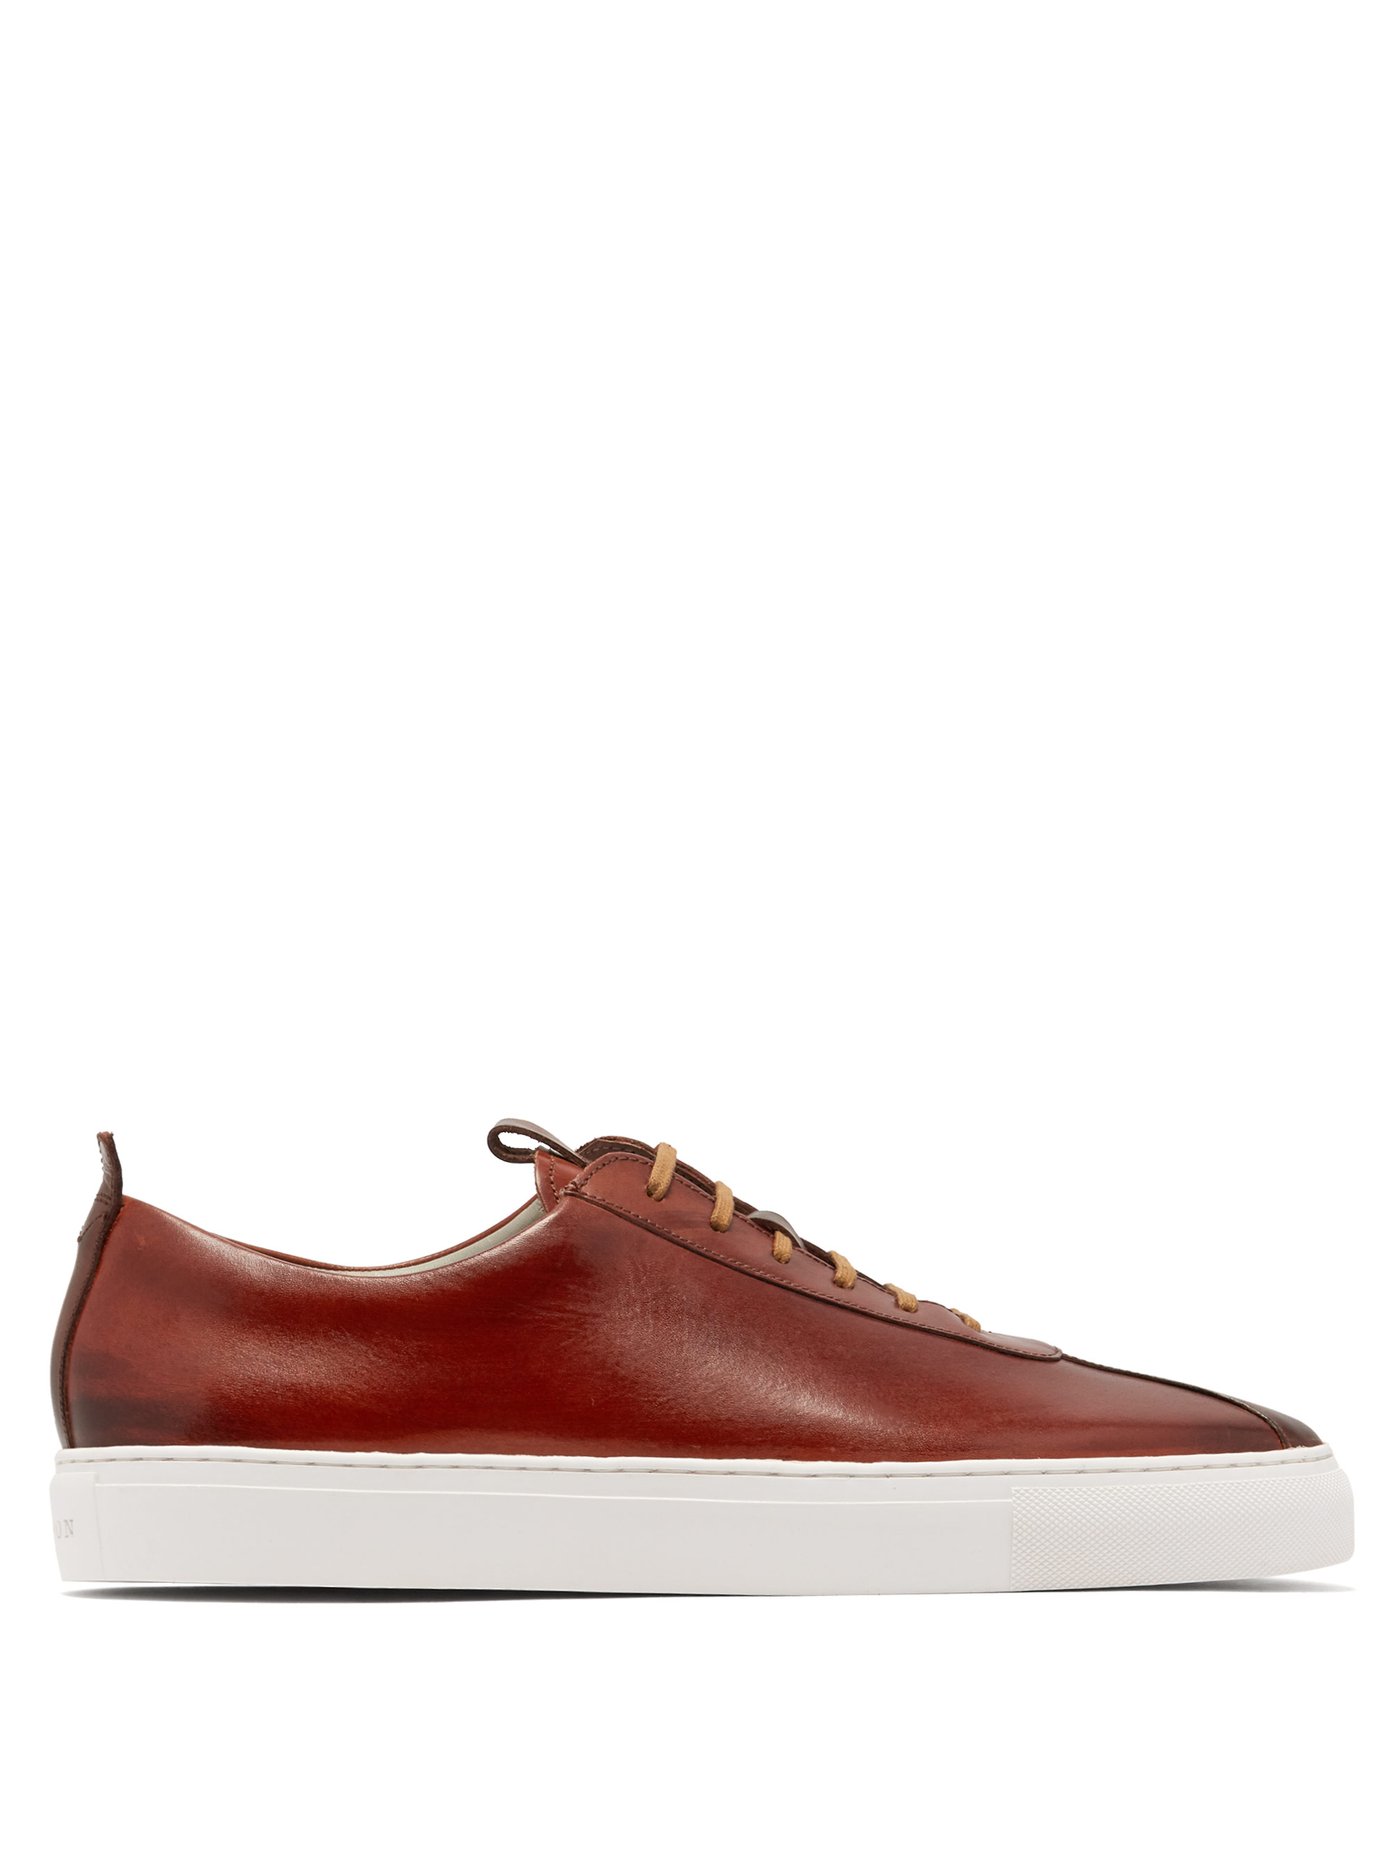 Sneaker 1 low-top leather trainers 